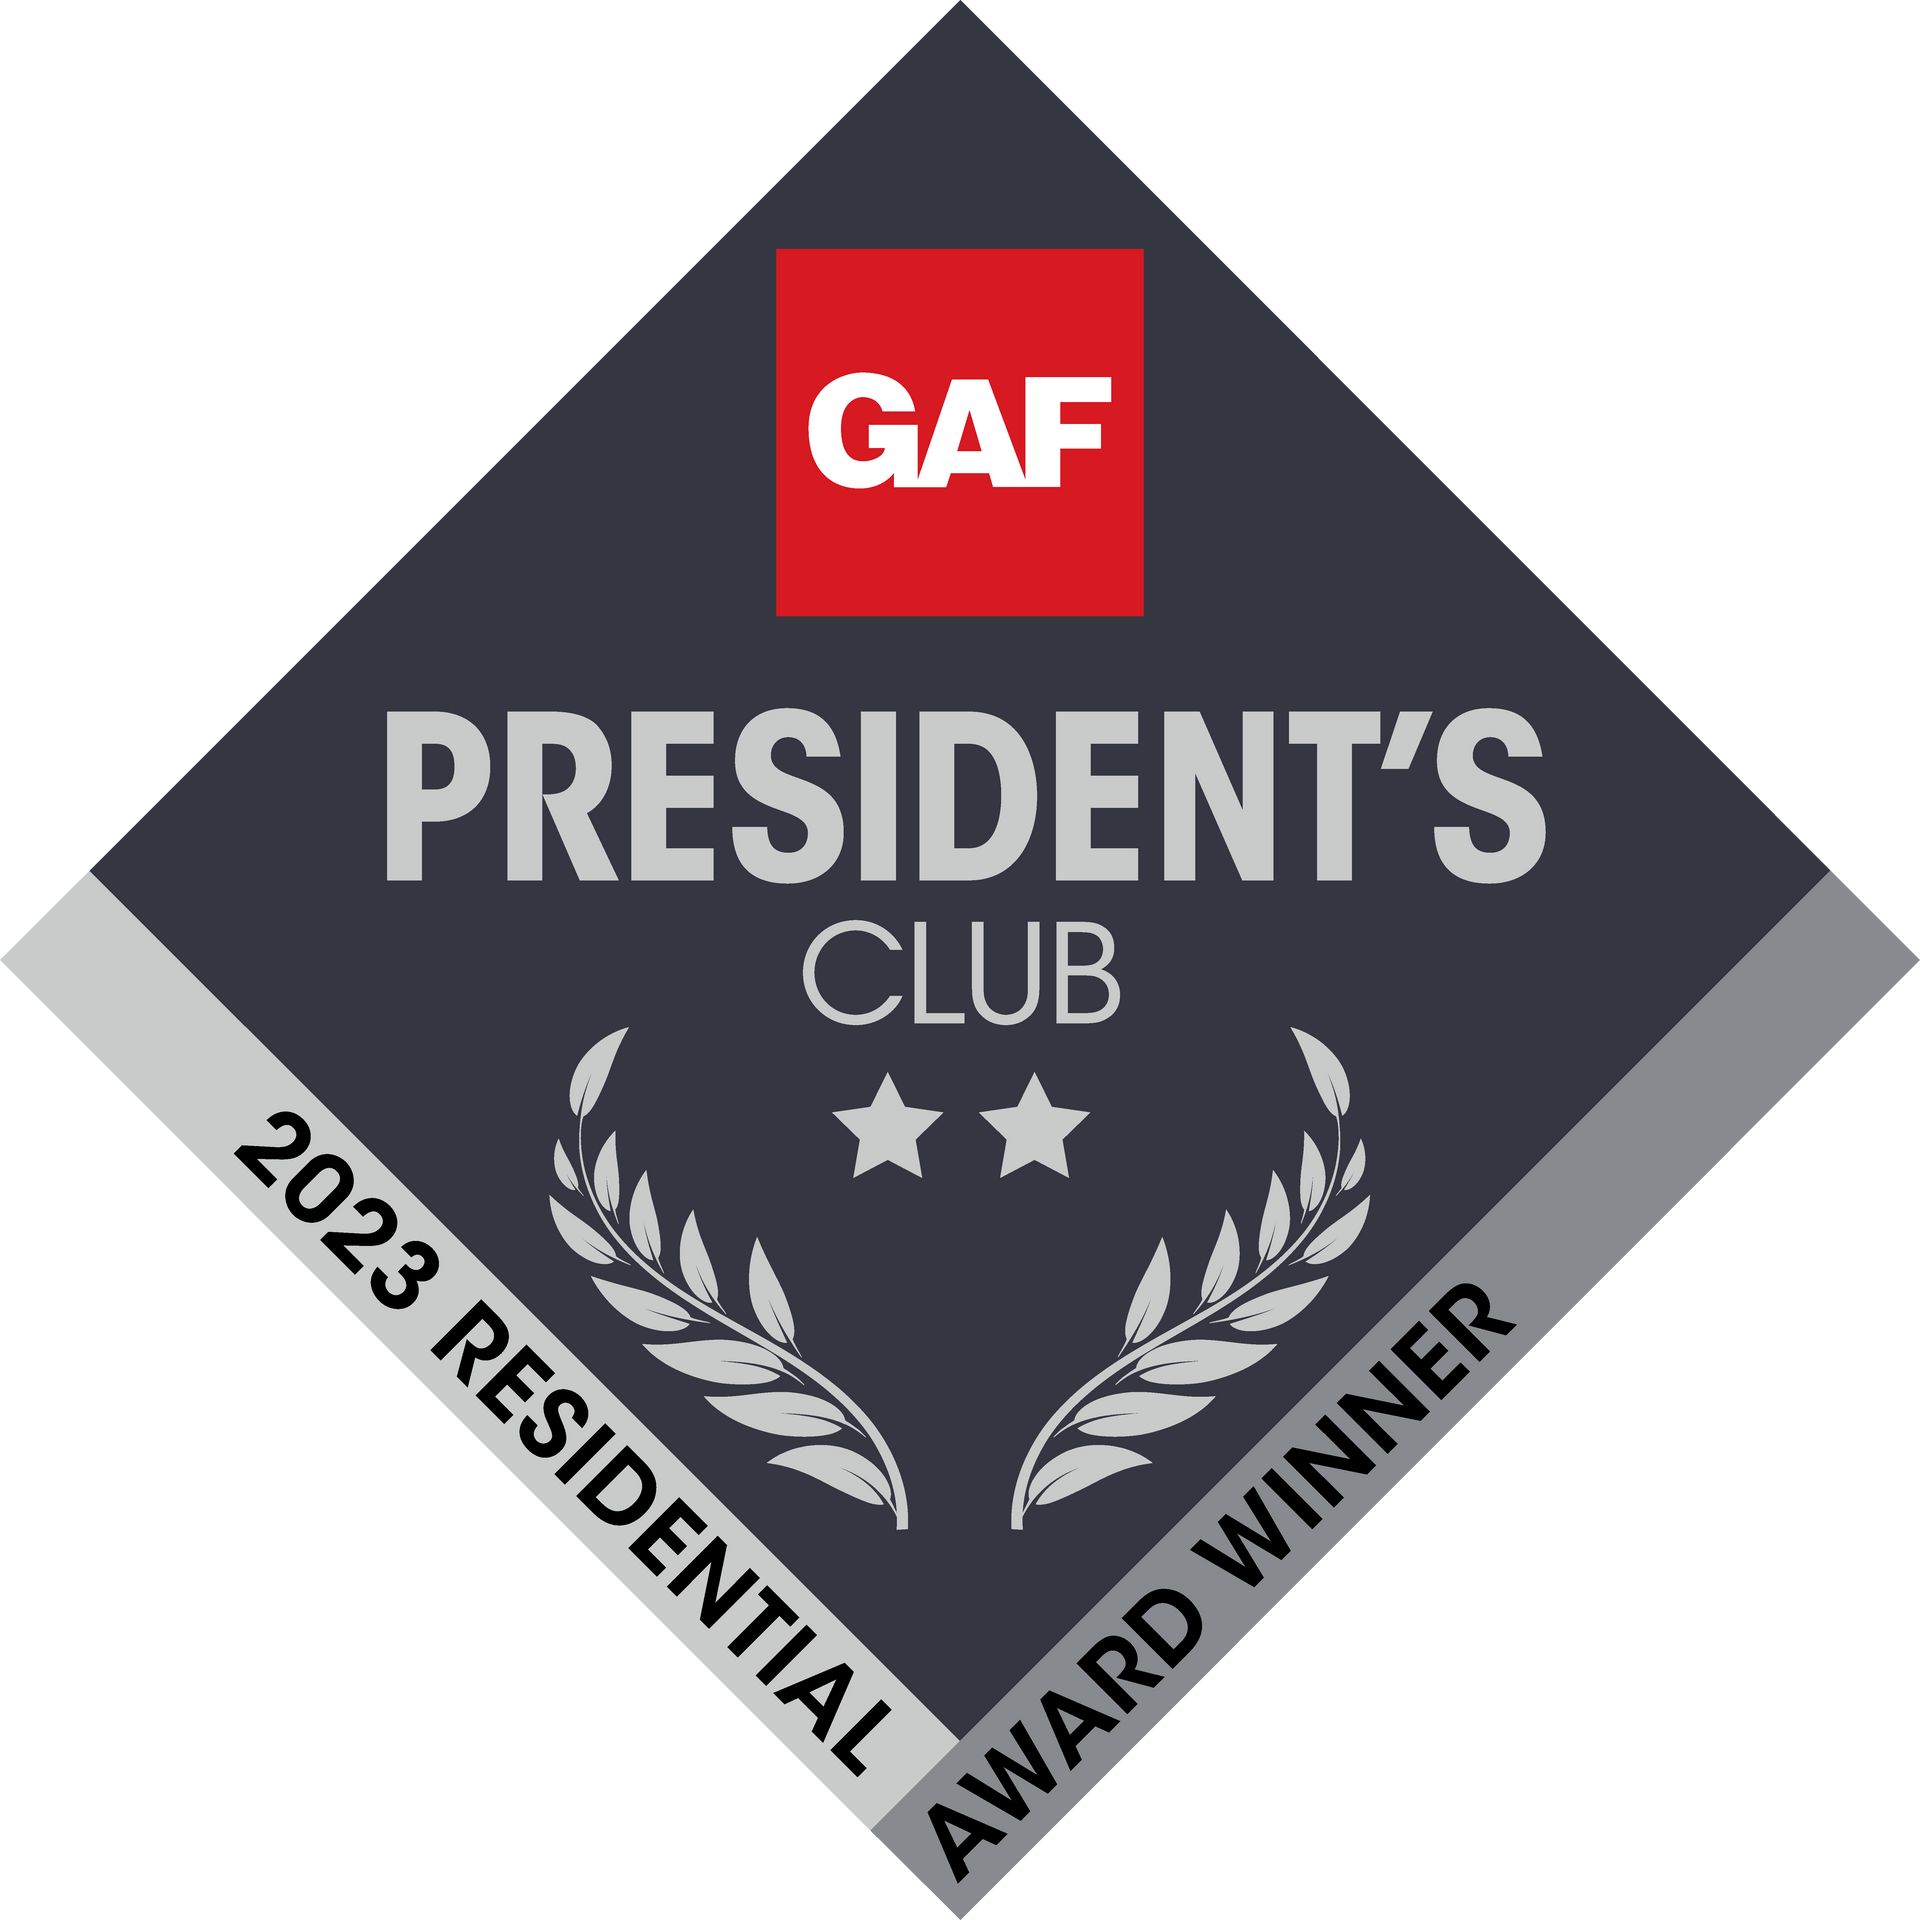 AMP Roofing announced GAF 2023 President's Club Winner for excellence in roof installation in Greater St. Louis MO Region